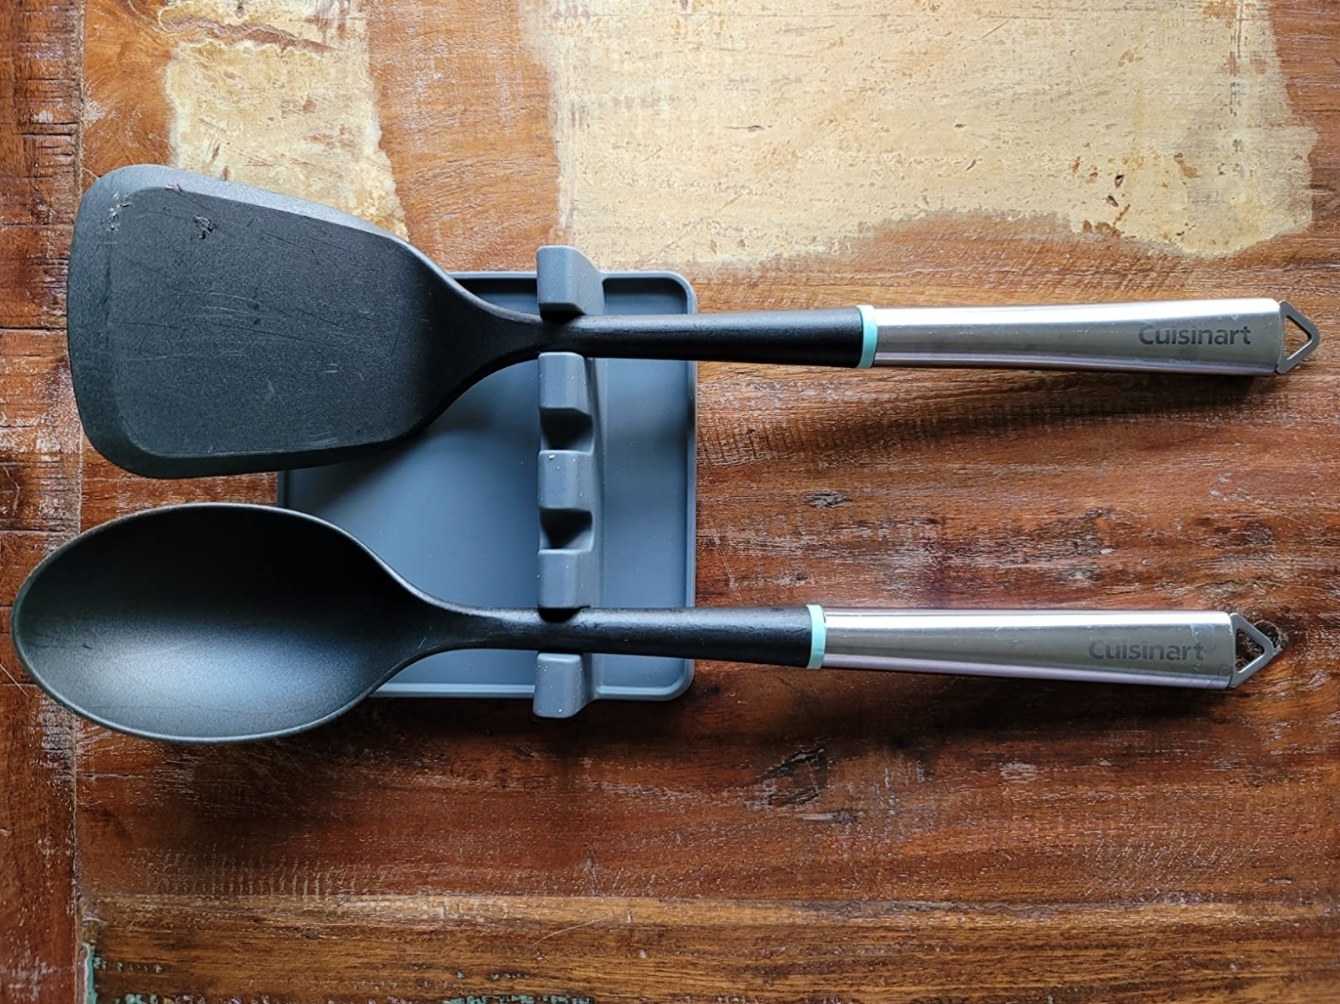 The utensil spoon rest in dark gray holding a spoon and spatula